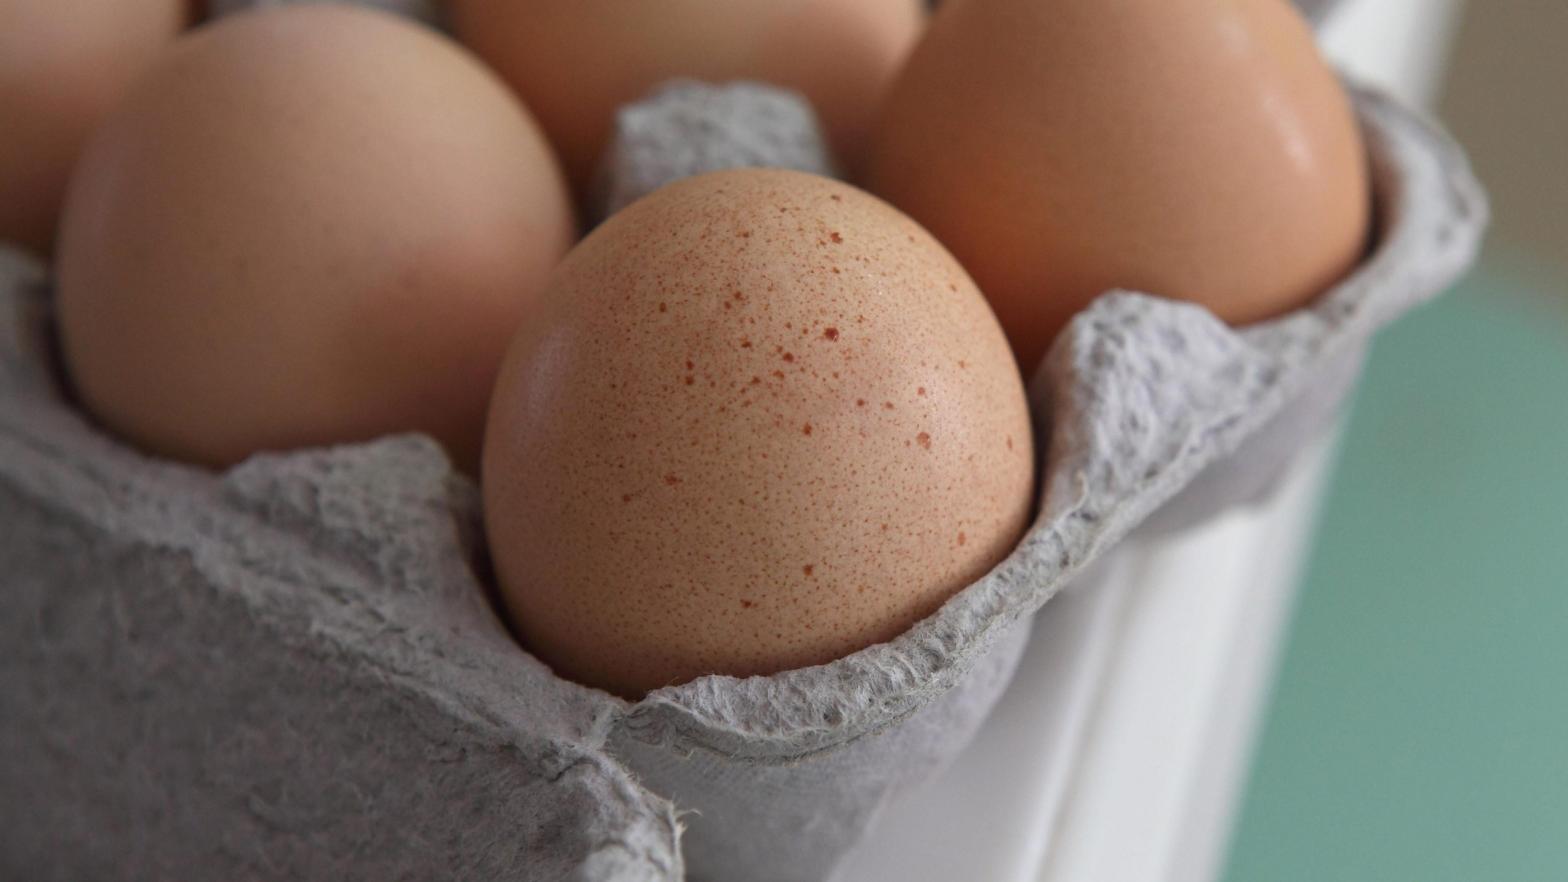 Eggs tend to be a common source of Salmonella outbreaks, though many foods and animals can spread it as well.  (Photo: Justin Sullivan, Getty Images)